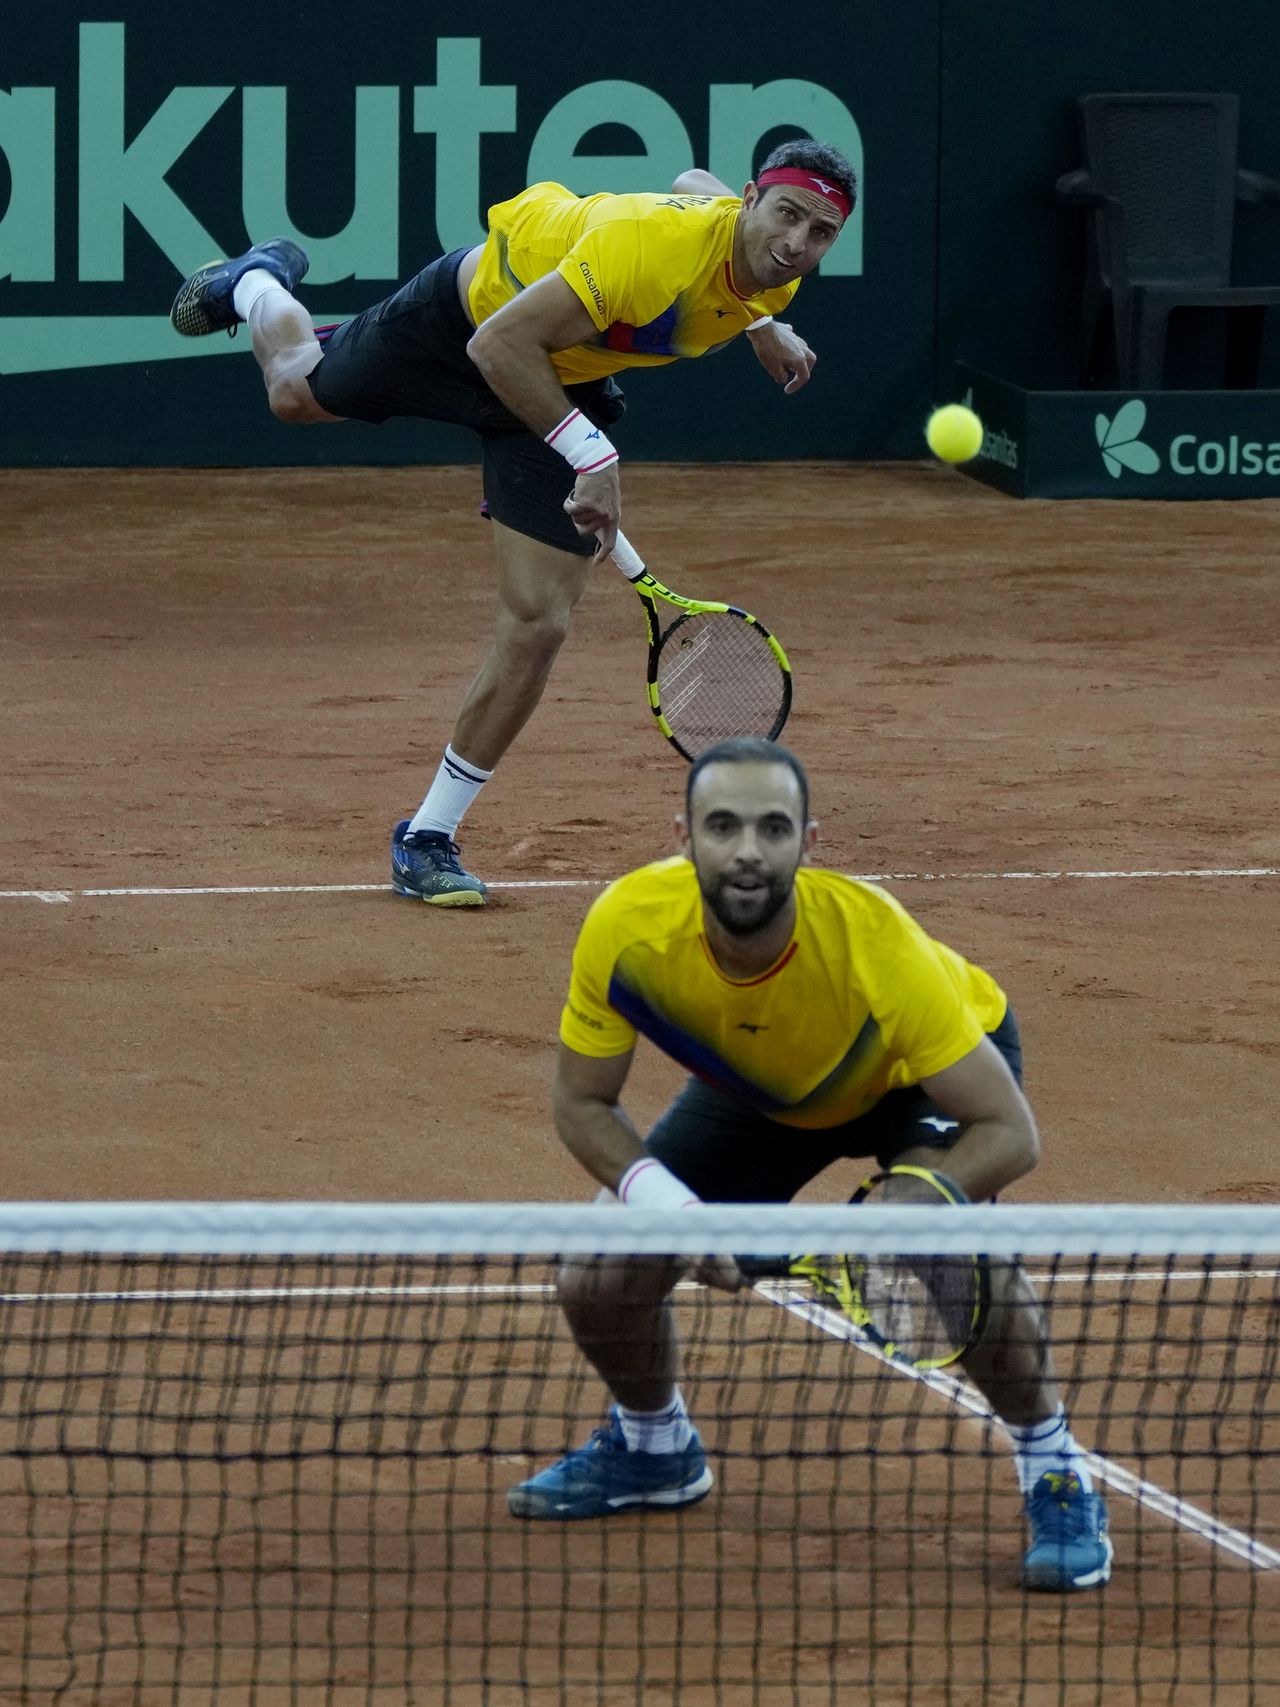 Colombia's Robert Farah, top, serves as teammate Juan Cabal, bottom watches during their Davis Cup qualification doubles match against Neal Skupski and Dan Evans of Britain, in Cota, Colombia, Saturday, Feb. 4, 2023. (AP Photo/Fernando Vergara)